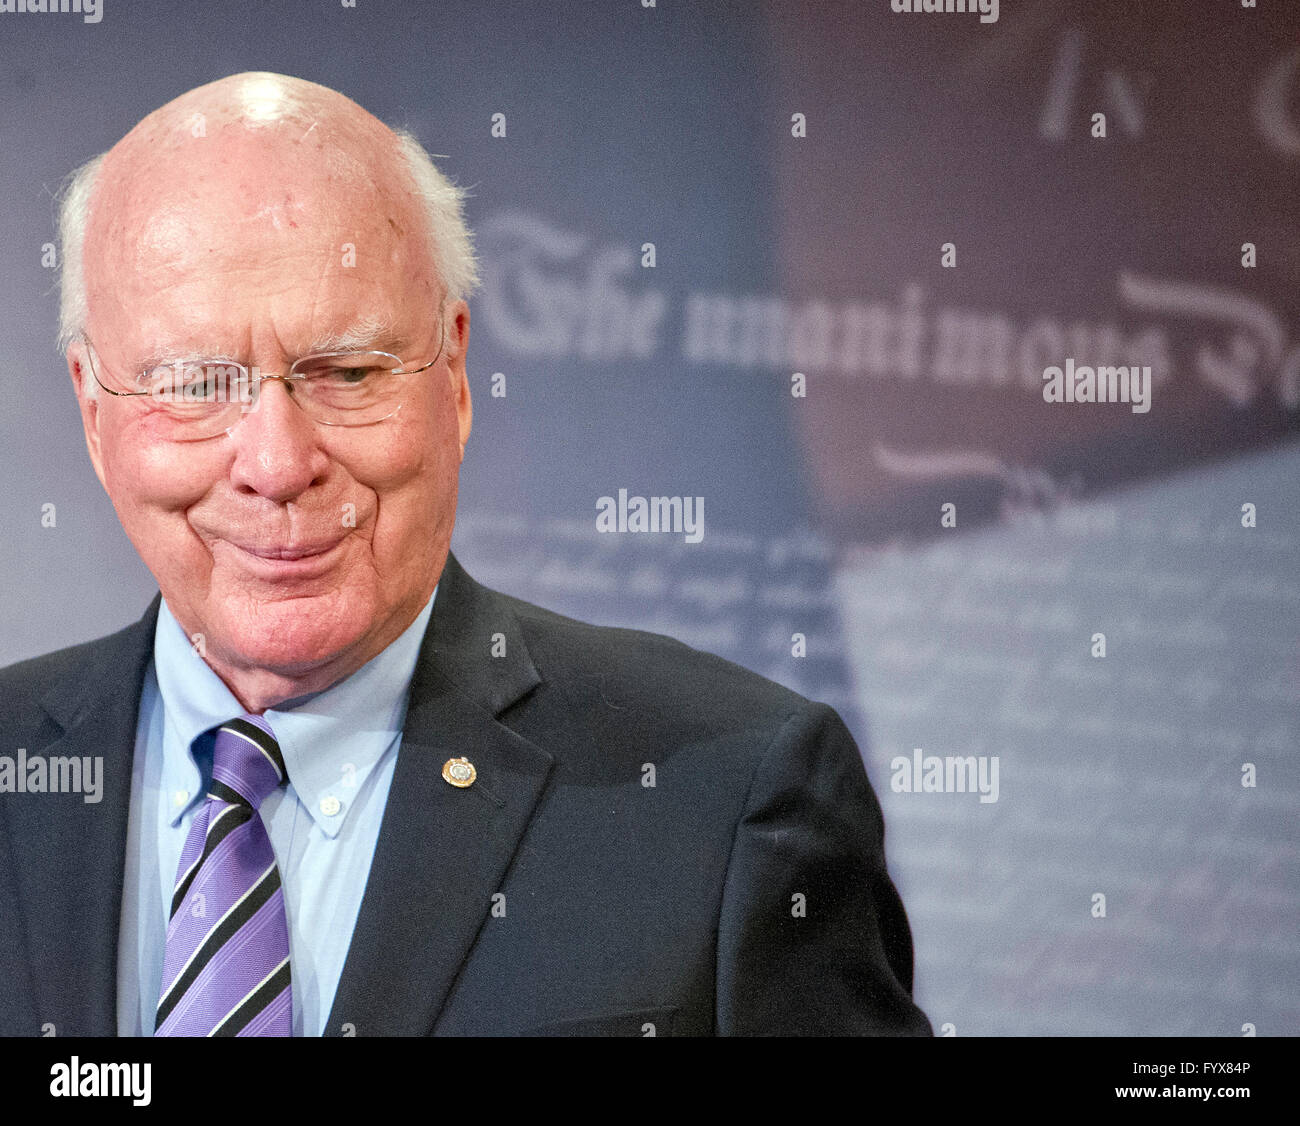 United States Senator Patrick Leahy (Democrat of Vermont), Ranking Member, US Senate Judiciary Committee, makes remarks during a press conference calling on the US Senate Republican leadership to bring to the floor the bipartisan Sentencing Reform and Corrections Act, a bill to reduce some mandatory minimum sentences and apply those changes retroactively to inmates currently serving unfair sentences. Credit: Ron Sachs/CNP - NO WIRE SERVICE - Stock Photo